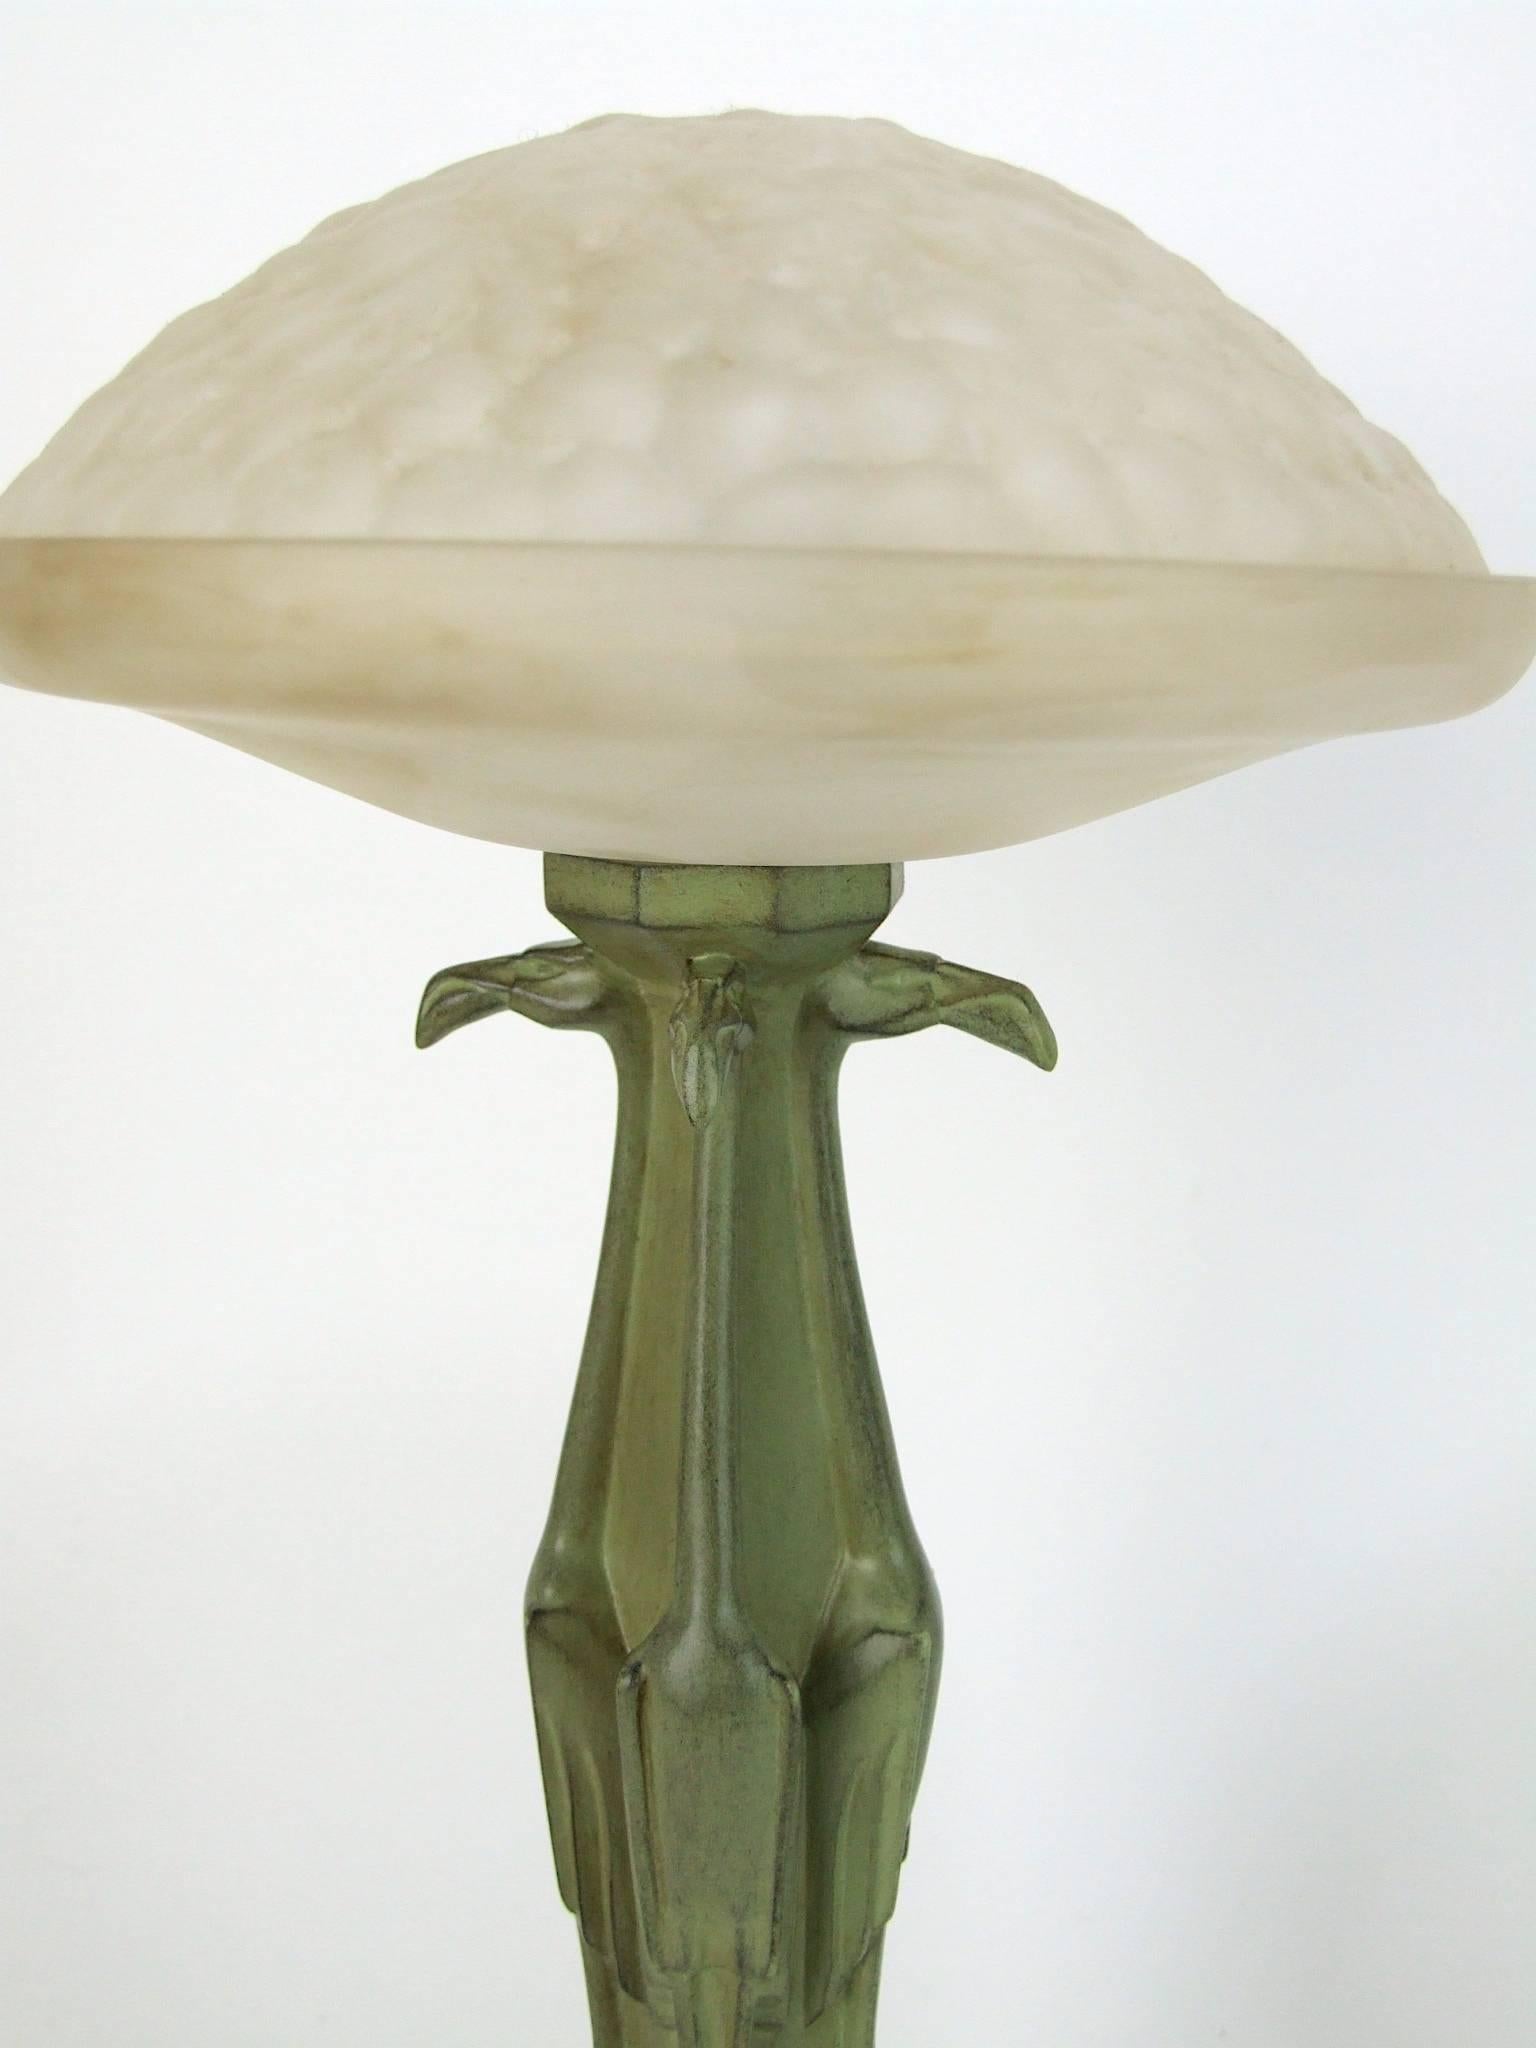 Pair of Art Deco Table Lamps by Le Verrier In Excellent Condition For Sale In Warlingham, GB